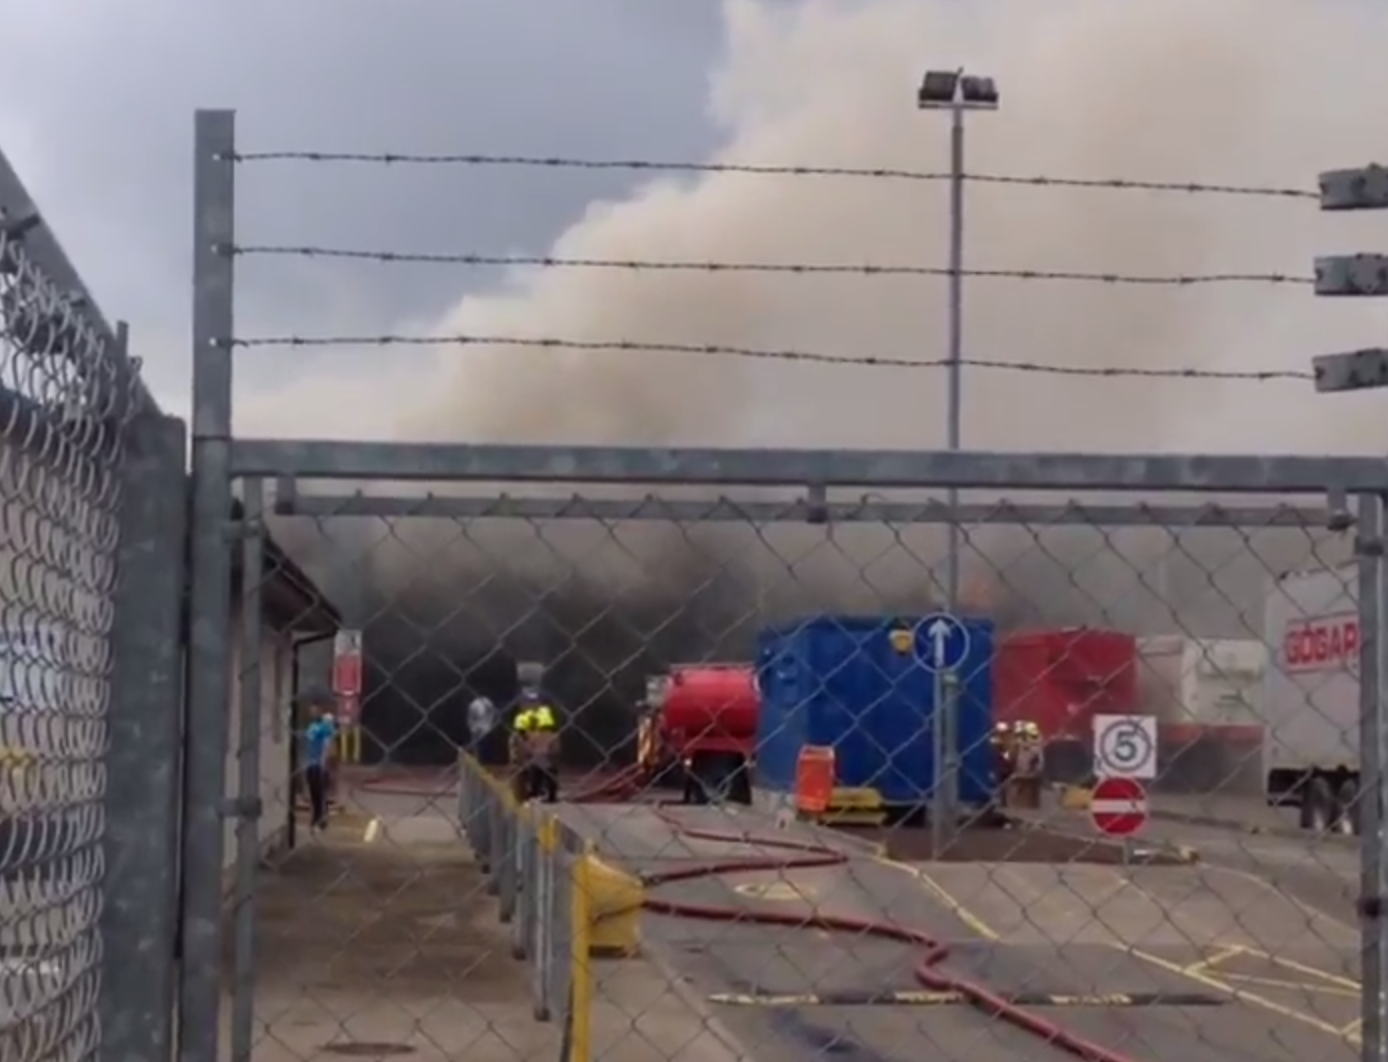 A large fire has taken hold in a waste station on Henderson Drive, Inverness